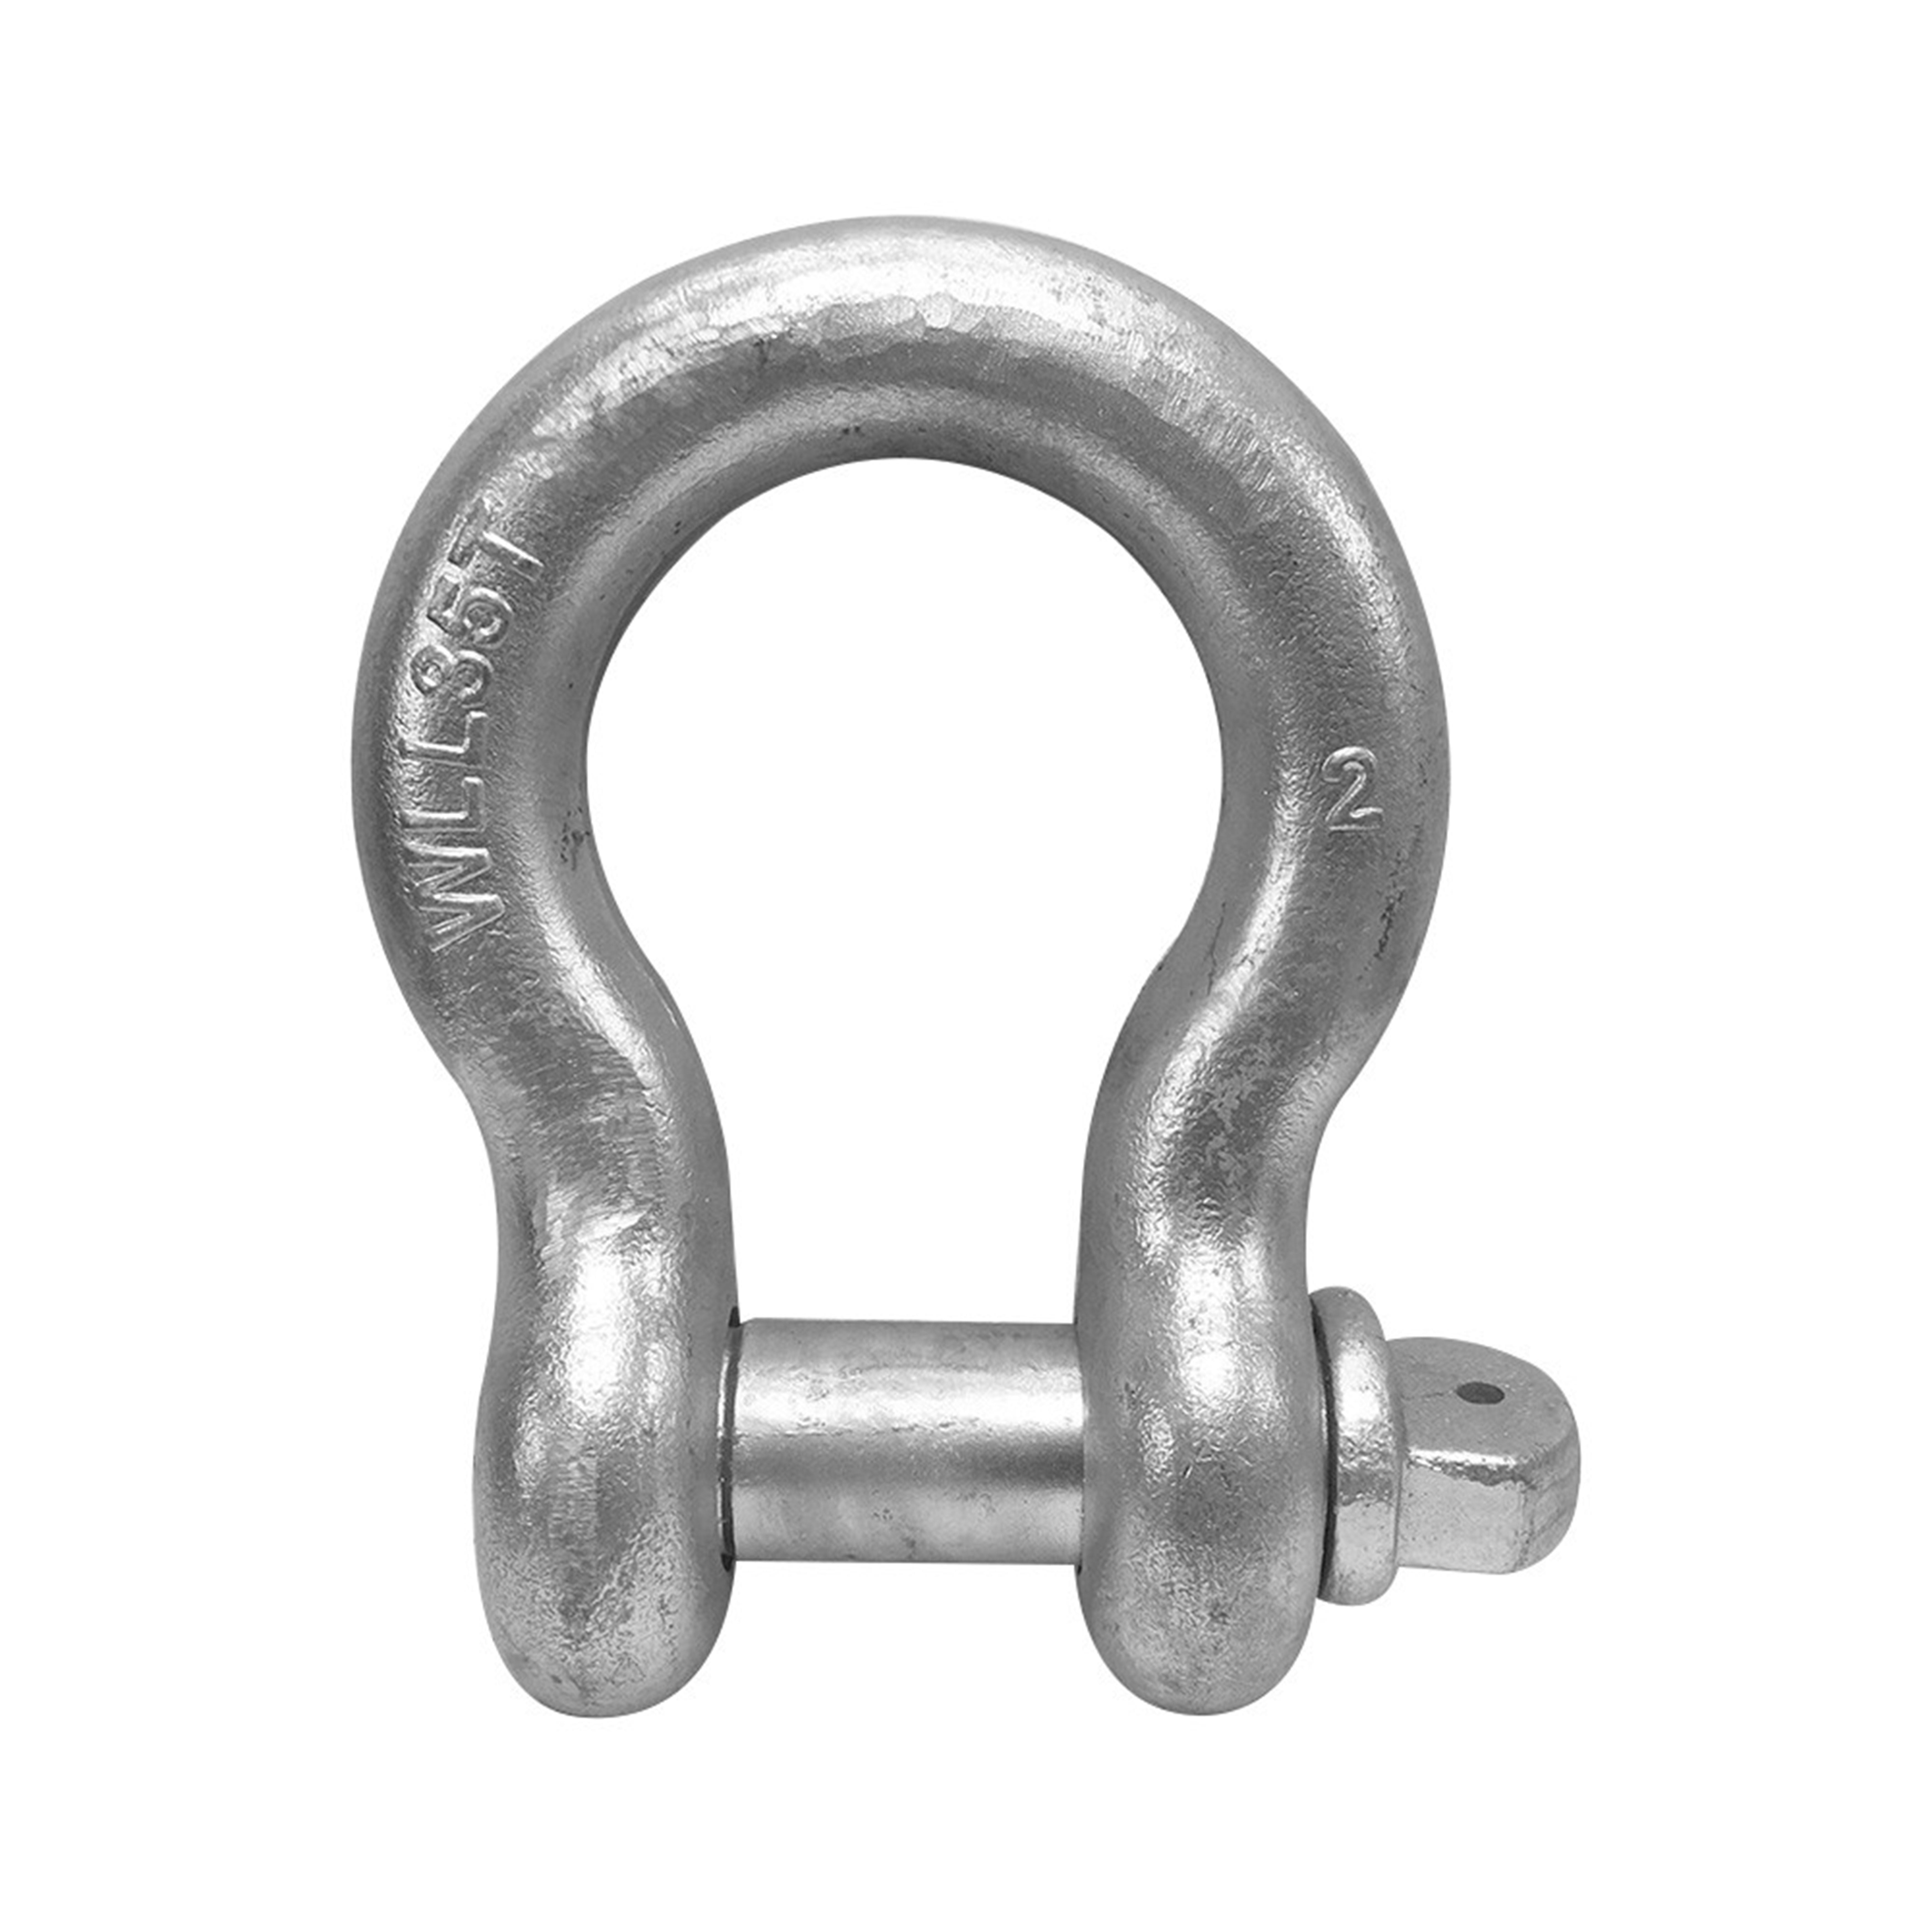 10 PC 3/16" Screw Pin Anchor Shackle Galvanized Steel Drop Forged 665 Lbs D Ring 